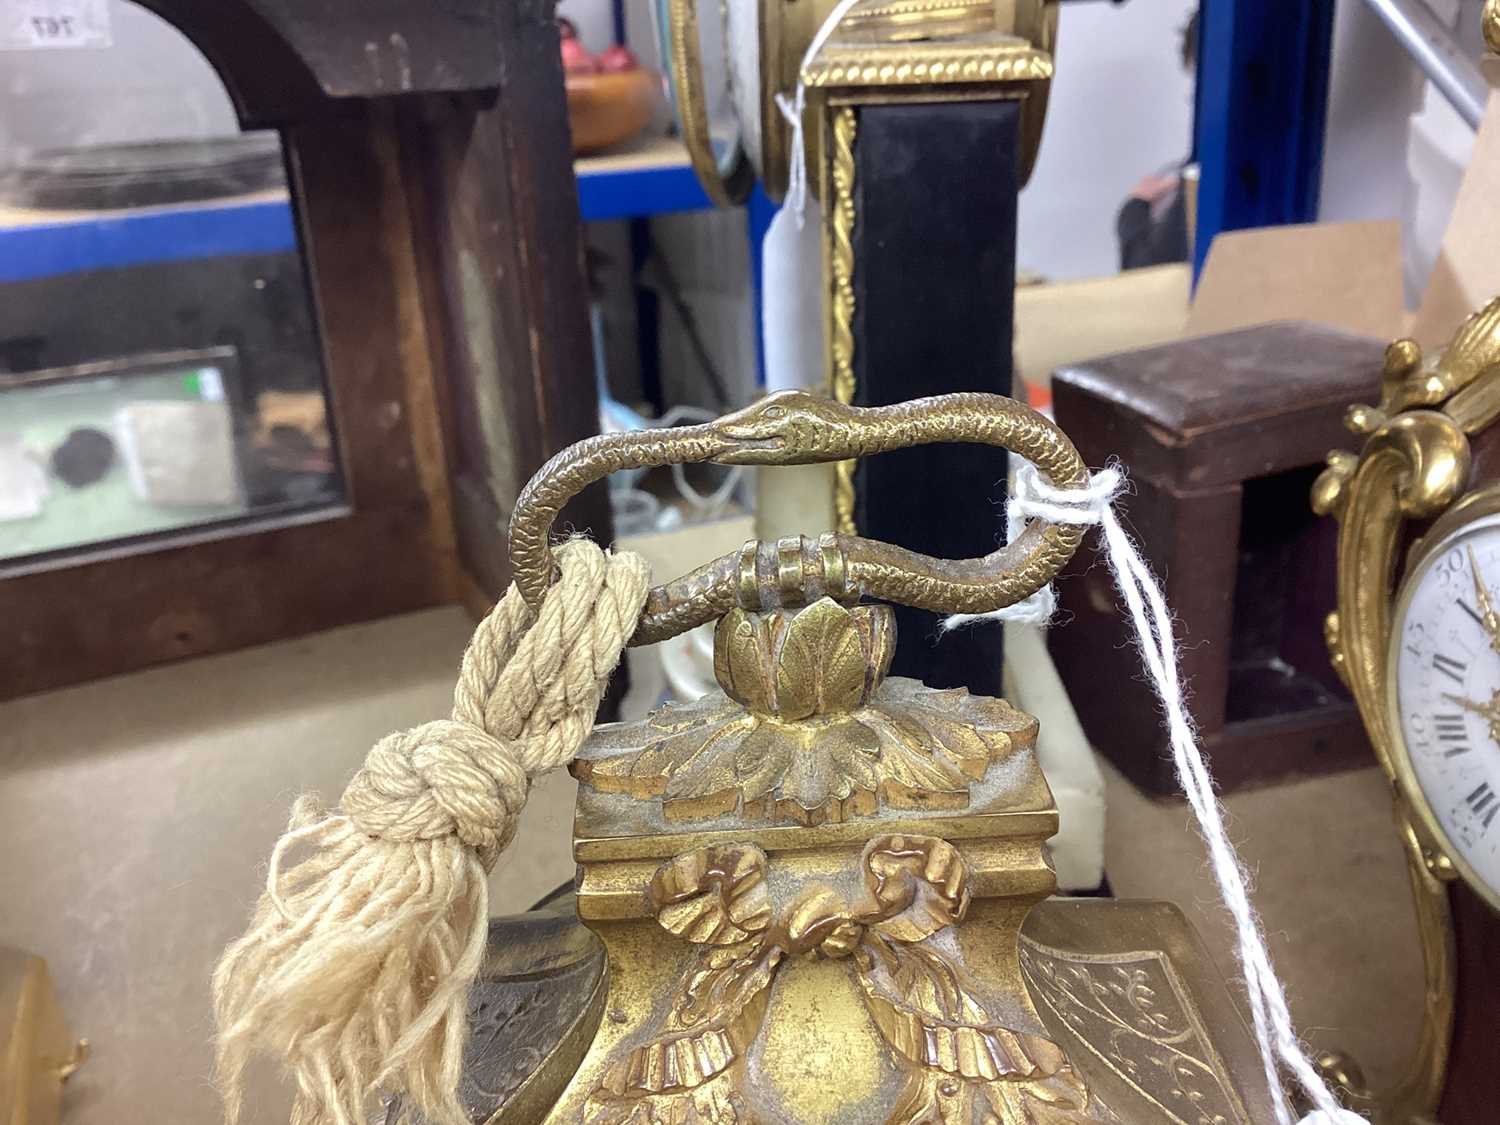 Early 20th century French ormolu Pendule d’Officer clock - Image 7 of 9